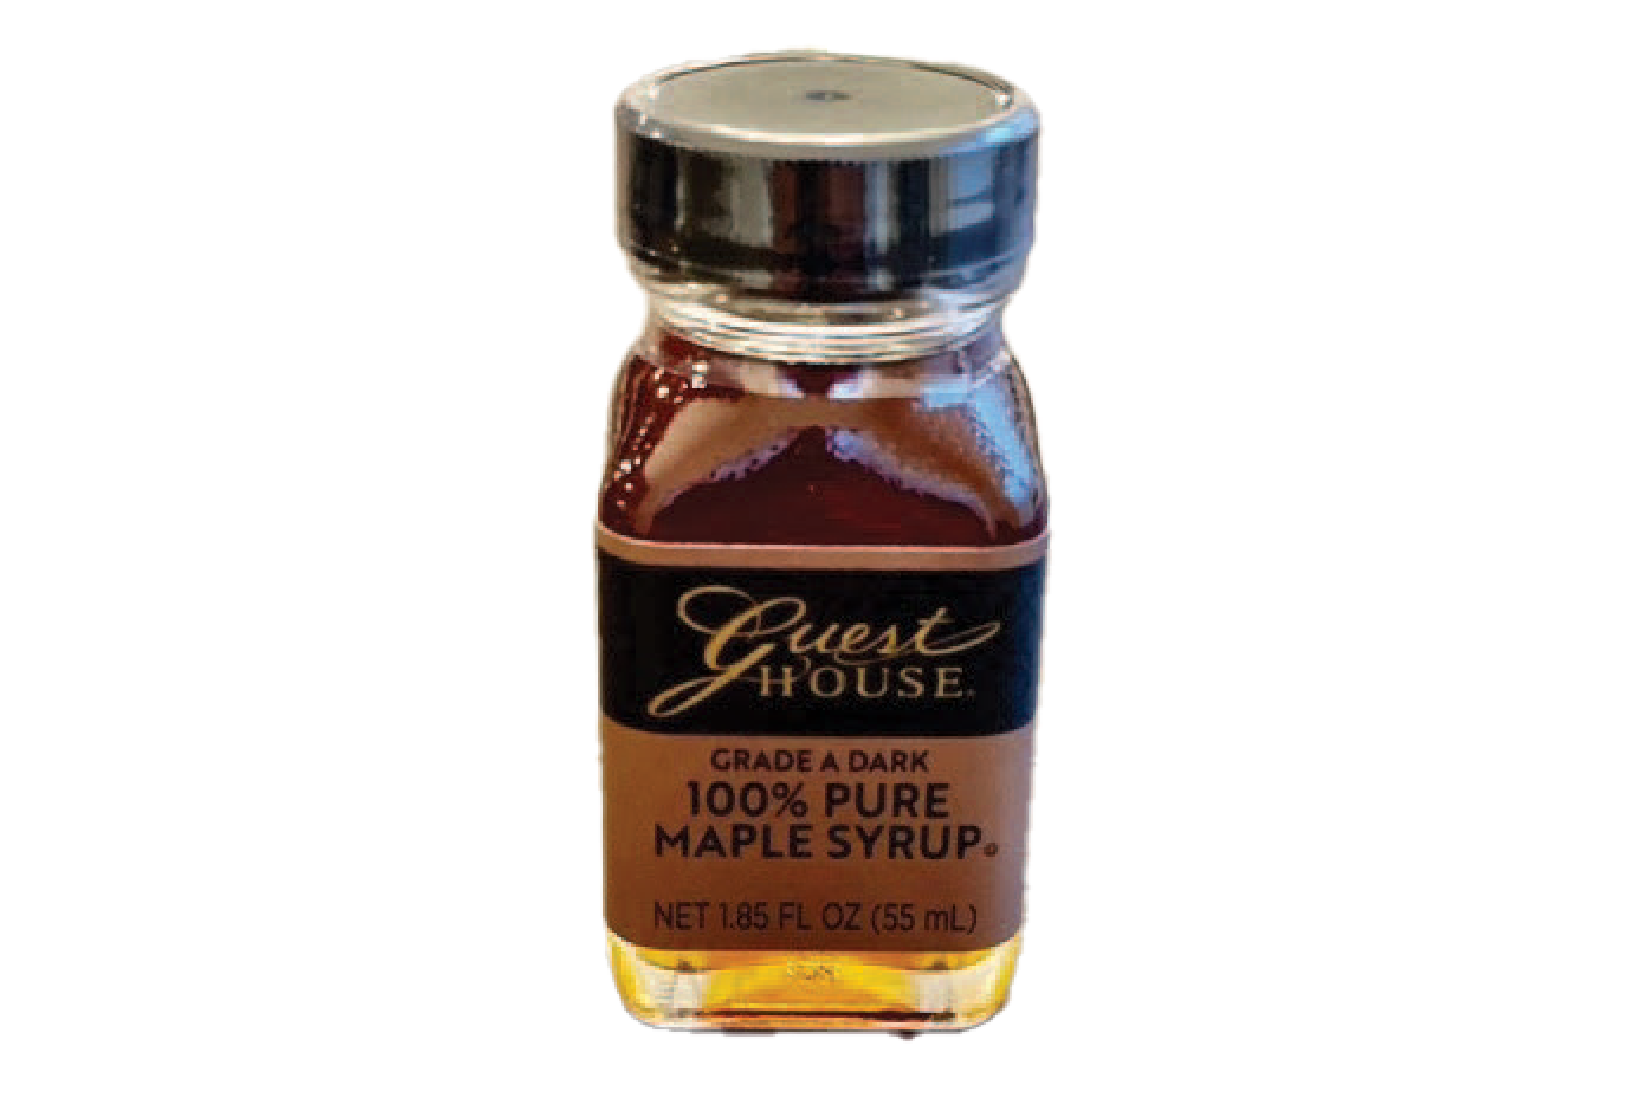 Guest House® 100% Pure Maple Syrup Grade A Dark Single serve Glass Containers